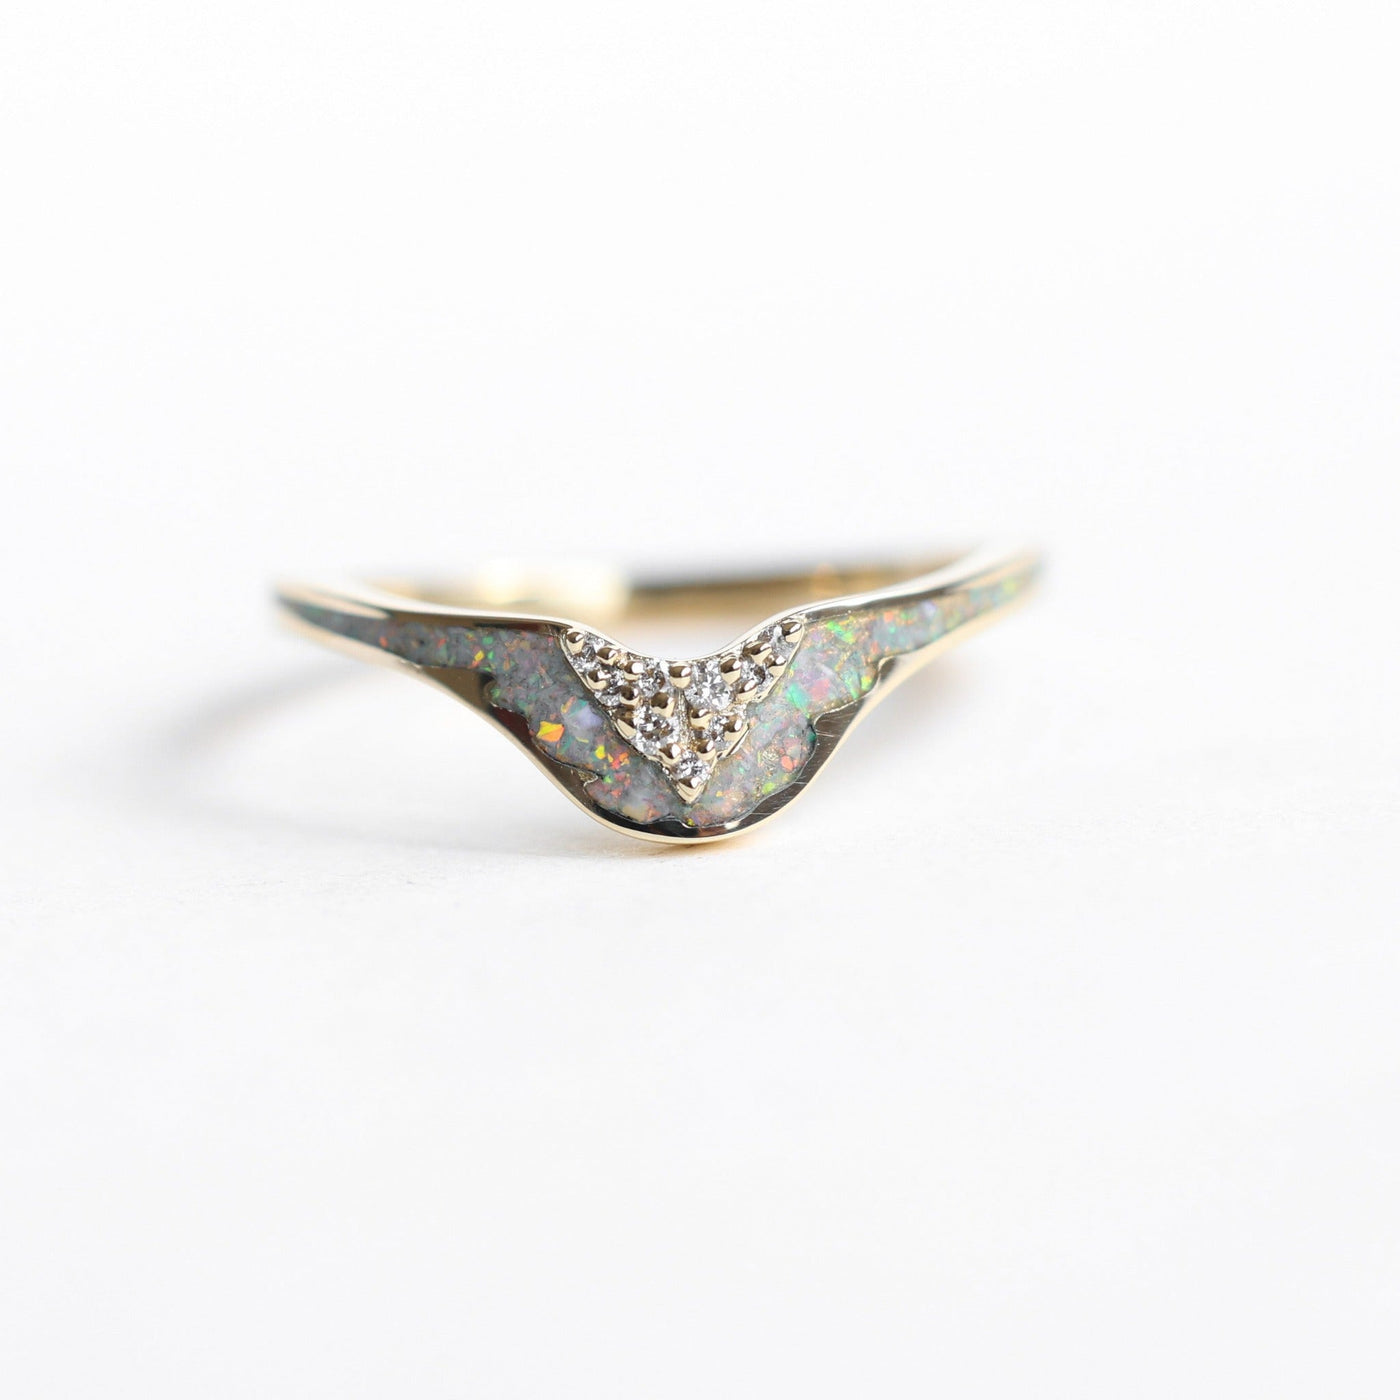 Nesting Band Inlaid Opal Ring with Round Diamonds